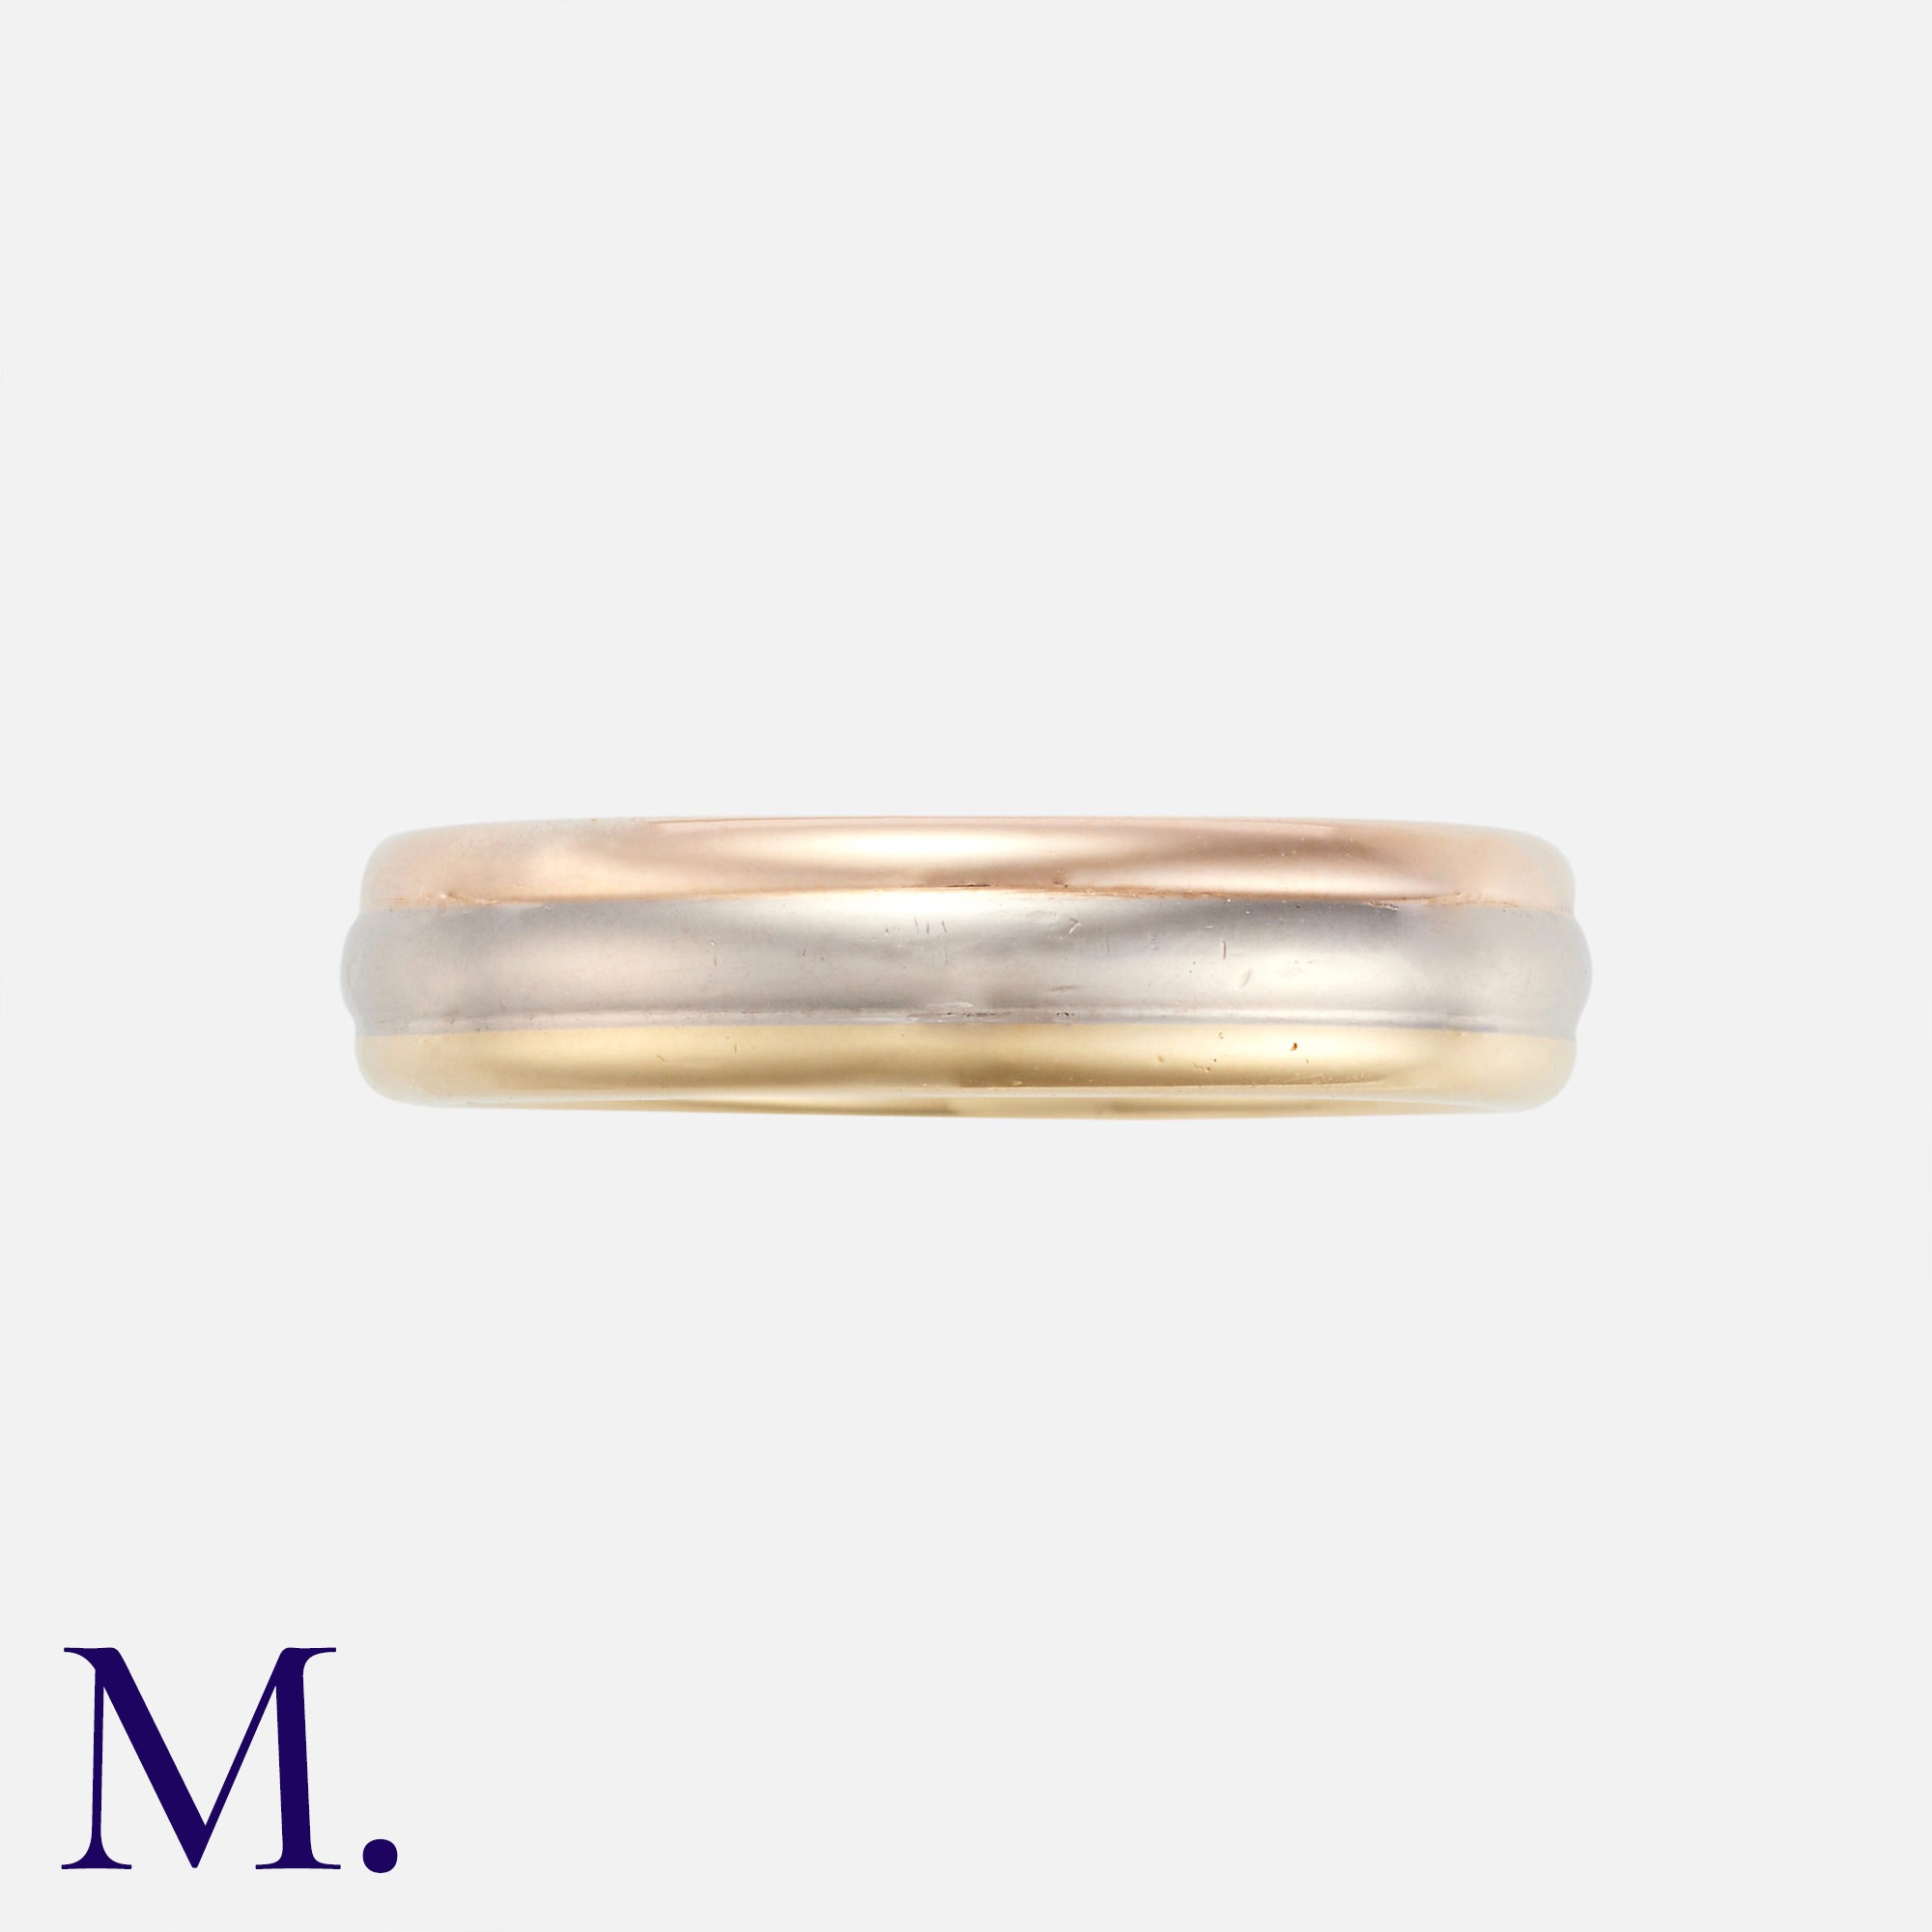 CARTIER. A Vendome Ring in 18K rose, white and yellow gold. Signed Cartier and marked for 18ct gold.